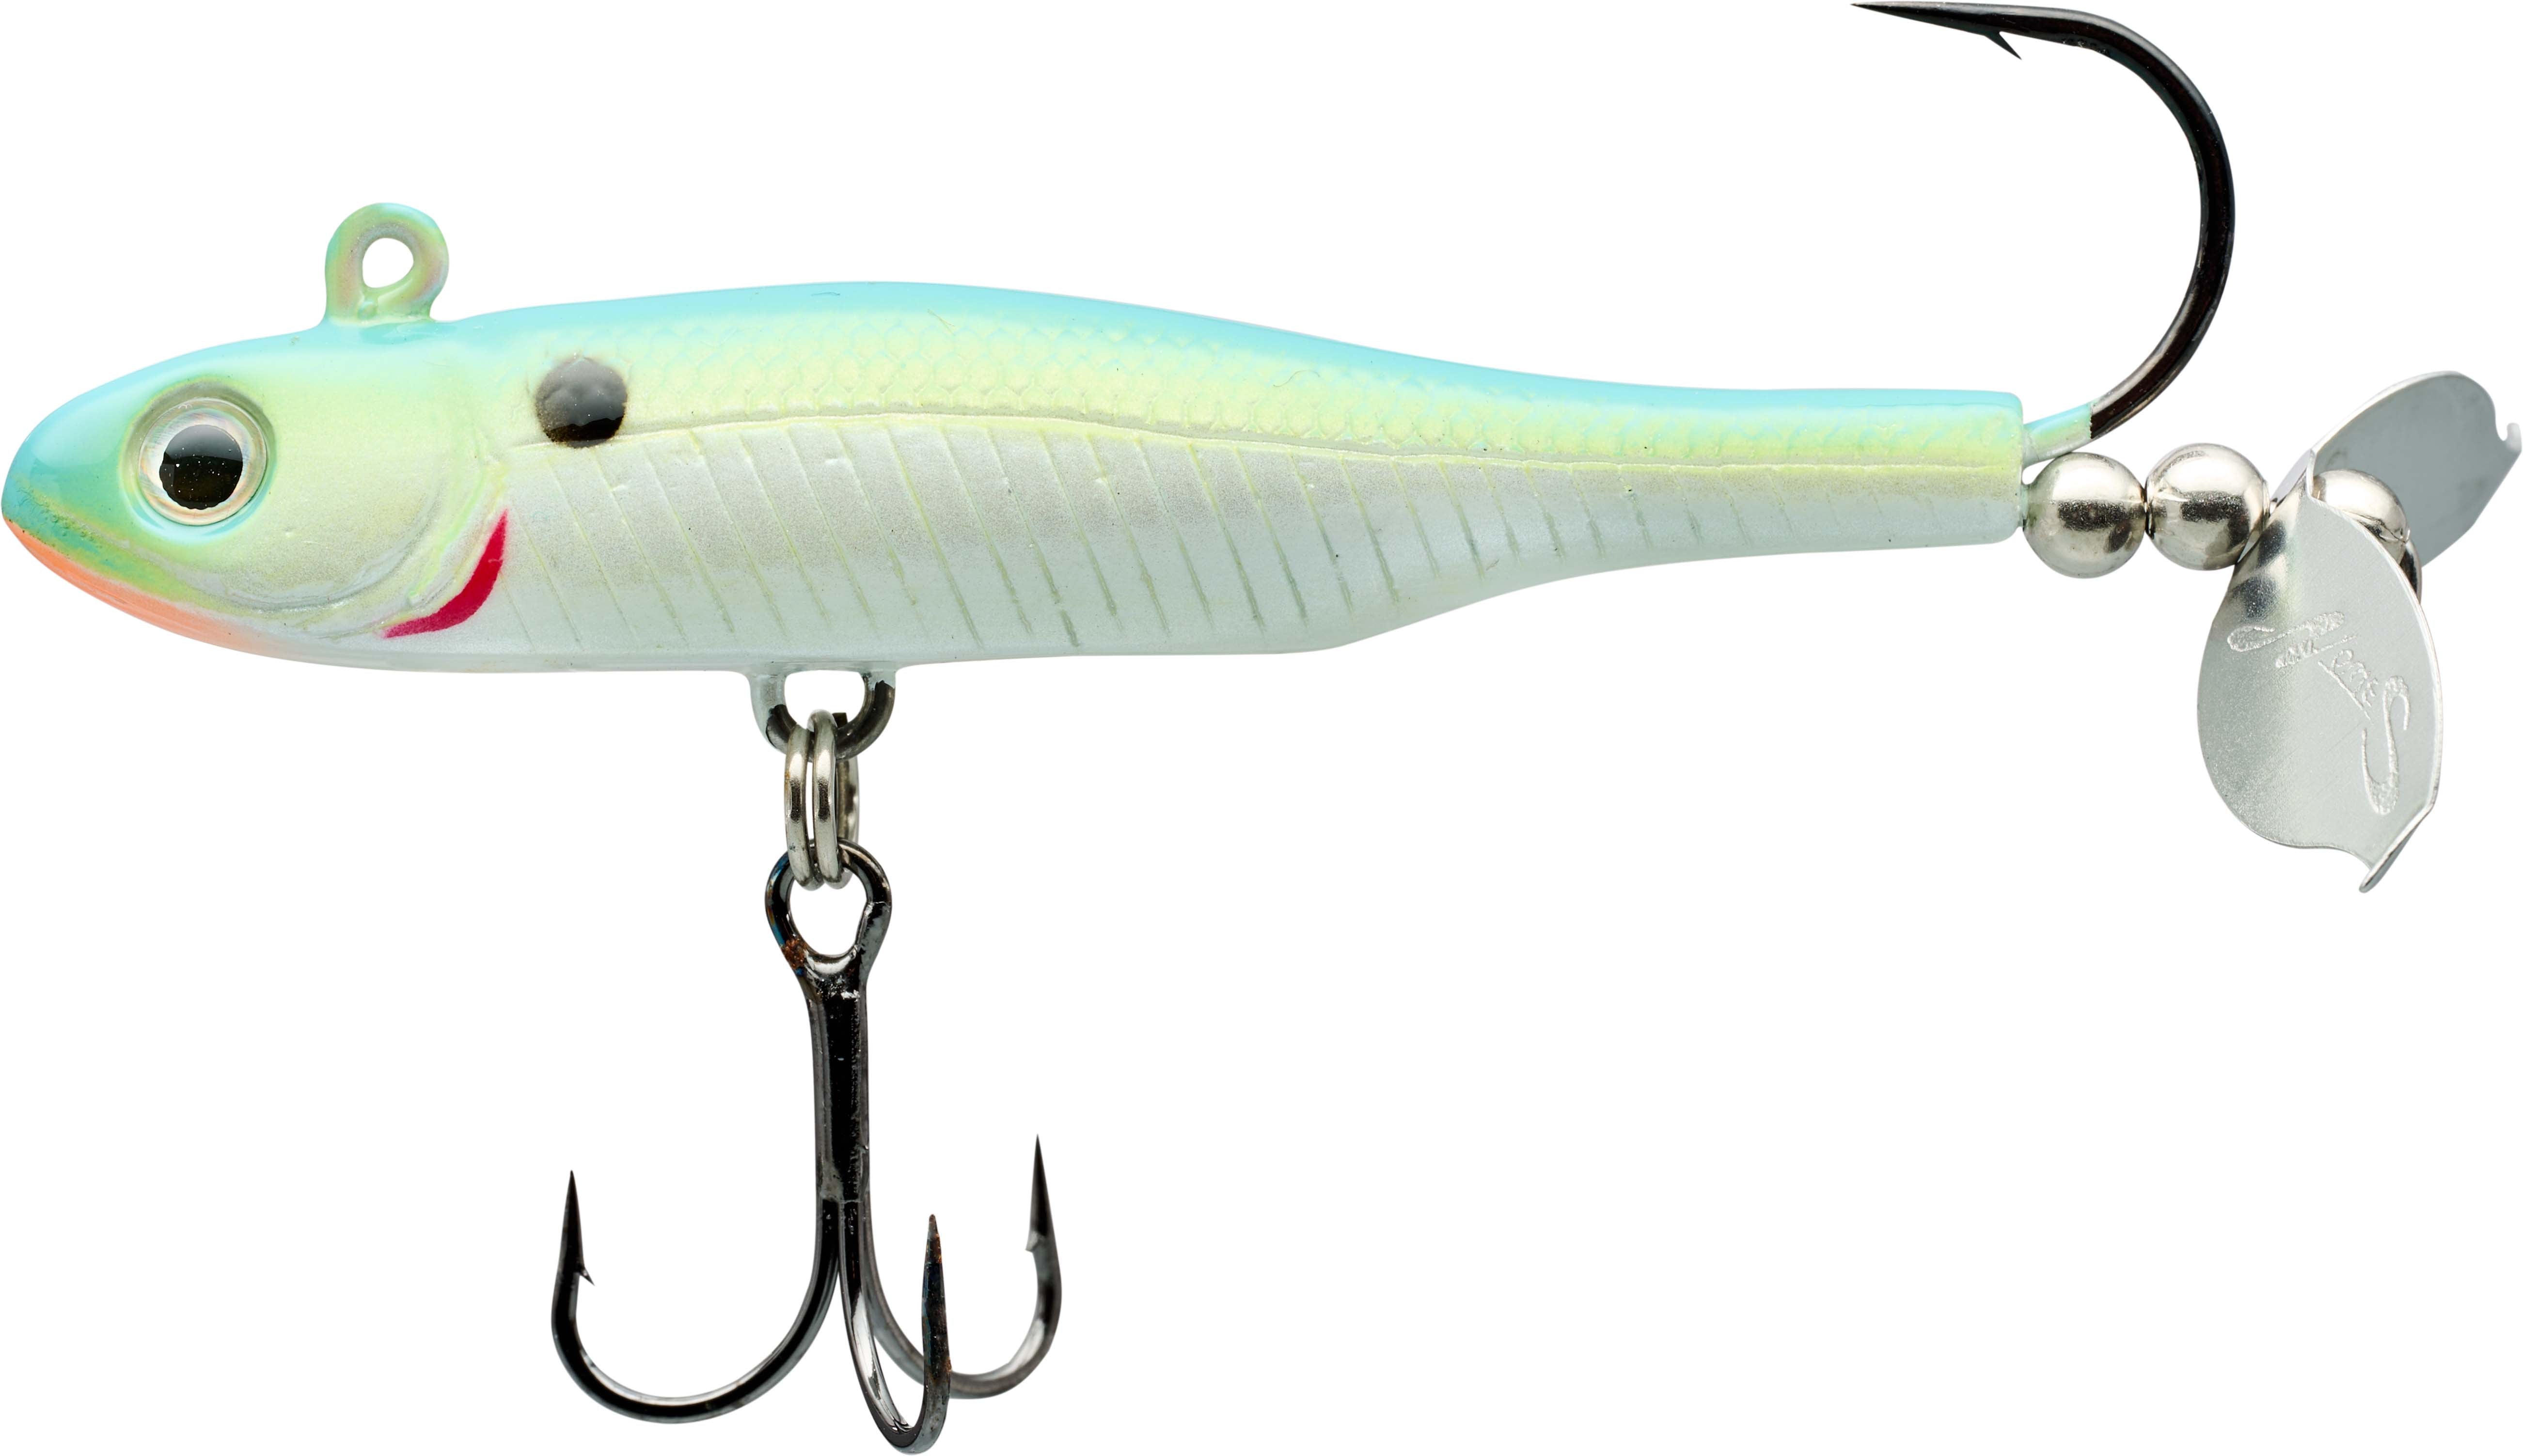 Nories Wrapping Minnow Prop Bait Citrus Shad / 10 G